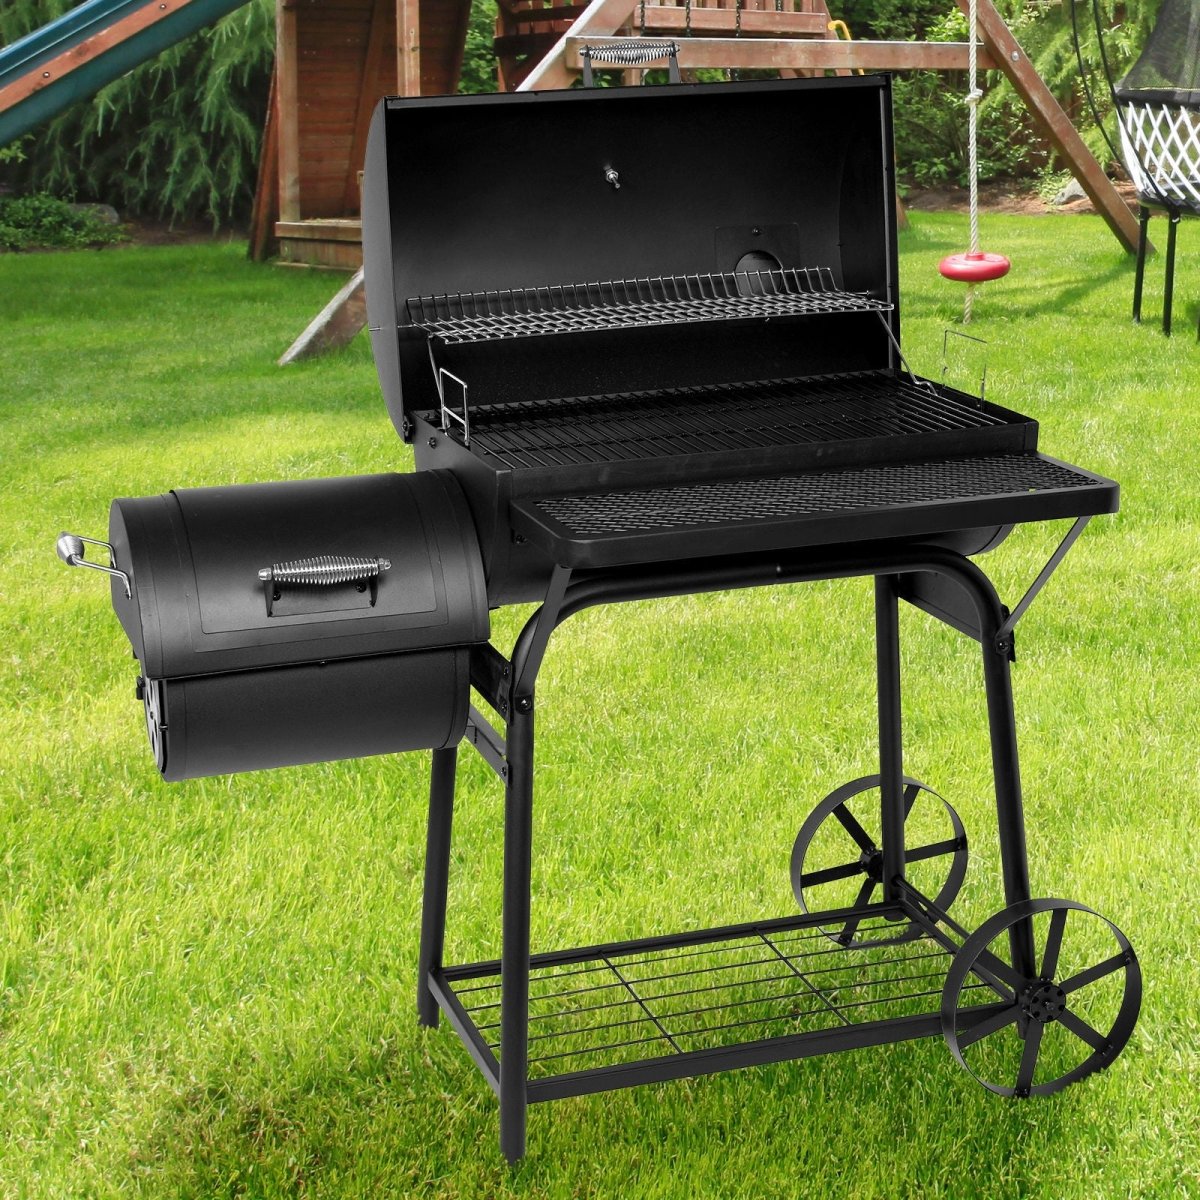 Havana Outdoors Charcoal 2-IN-1 BBQ Smoker Grill Barbecue Outdoor Cooking - Outdoorium